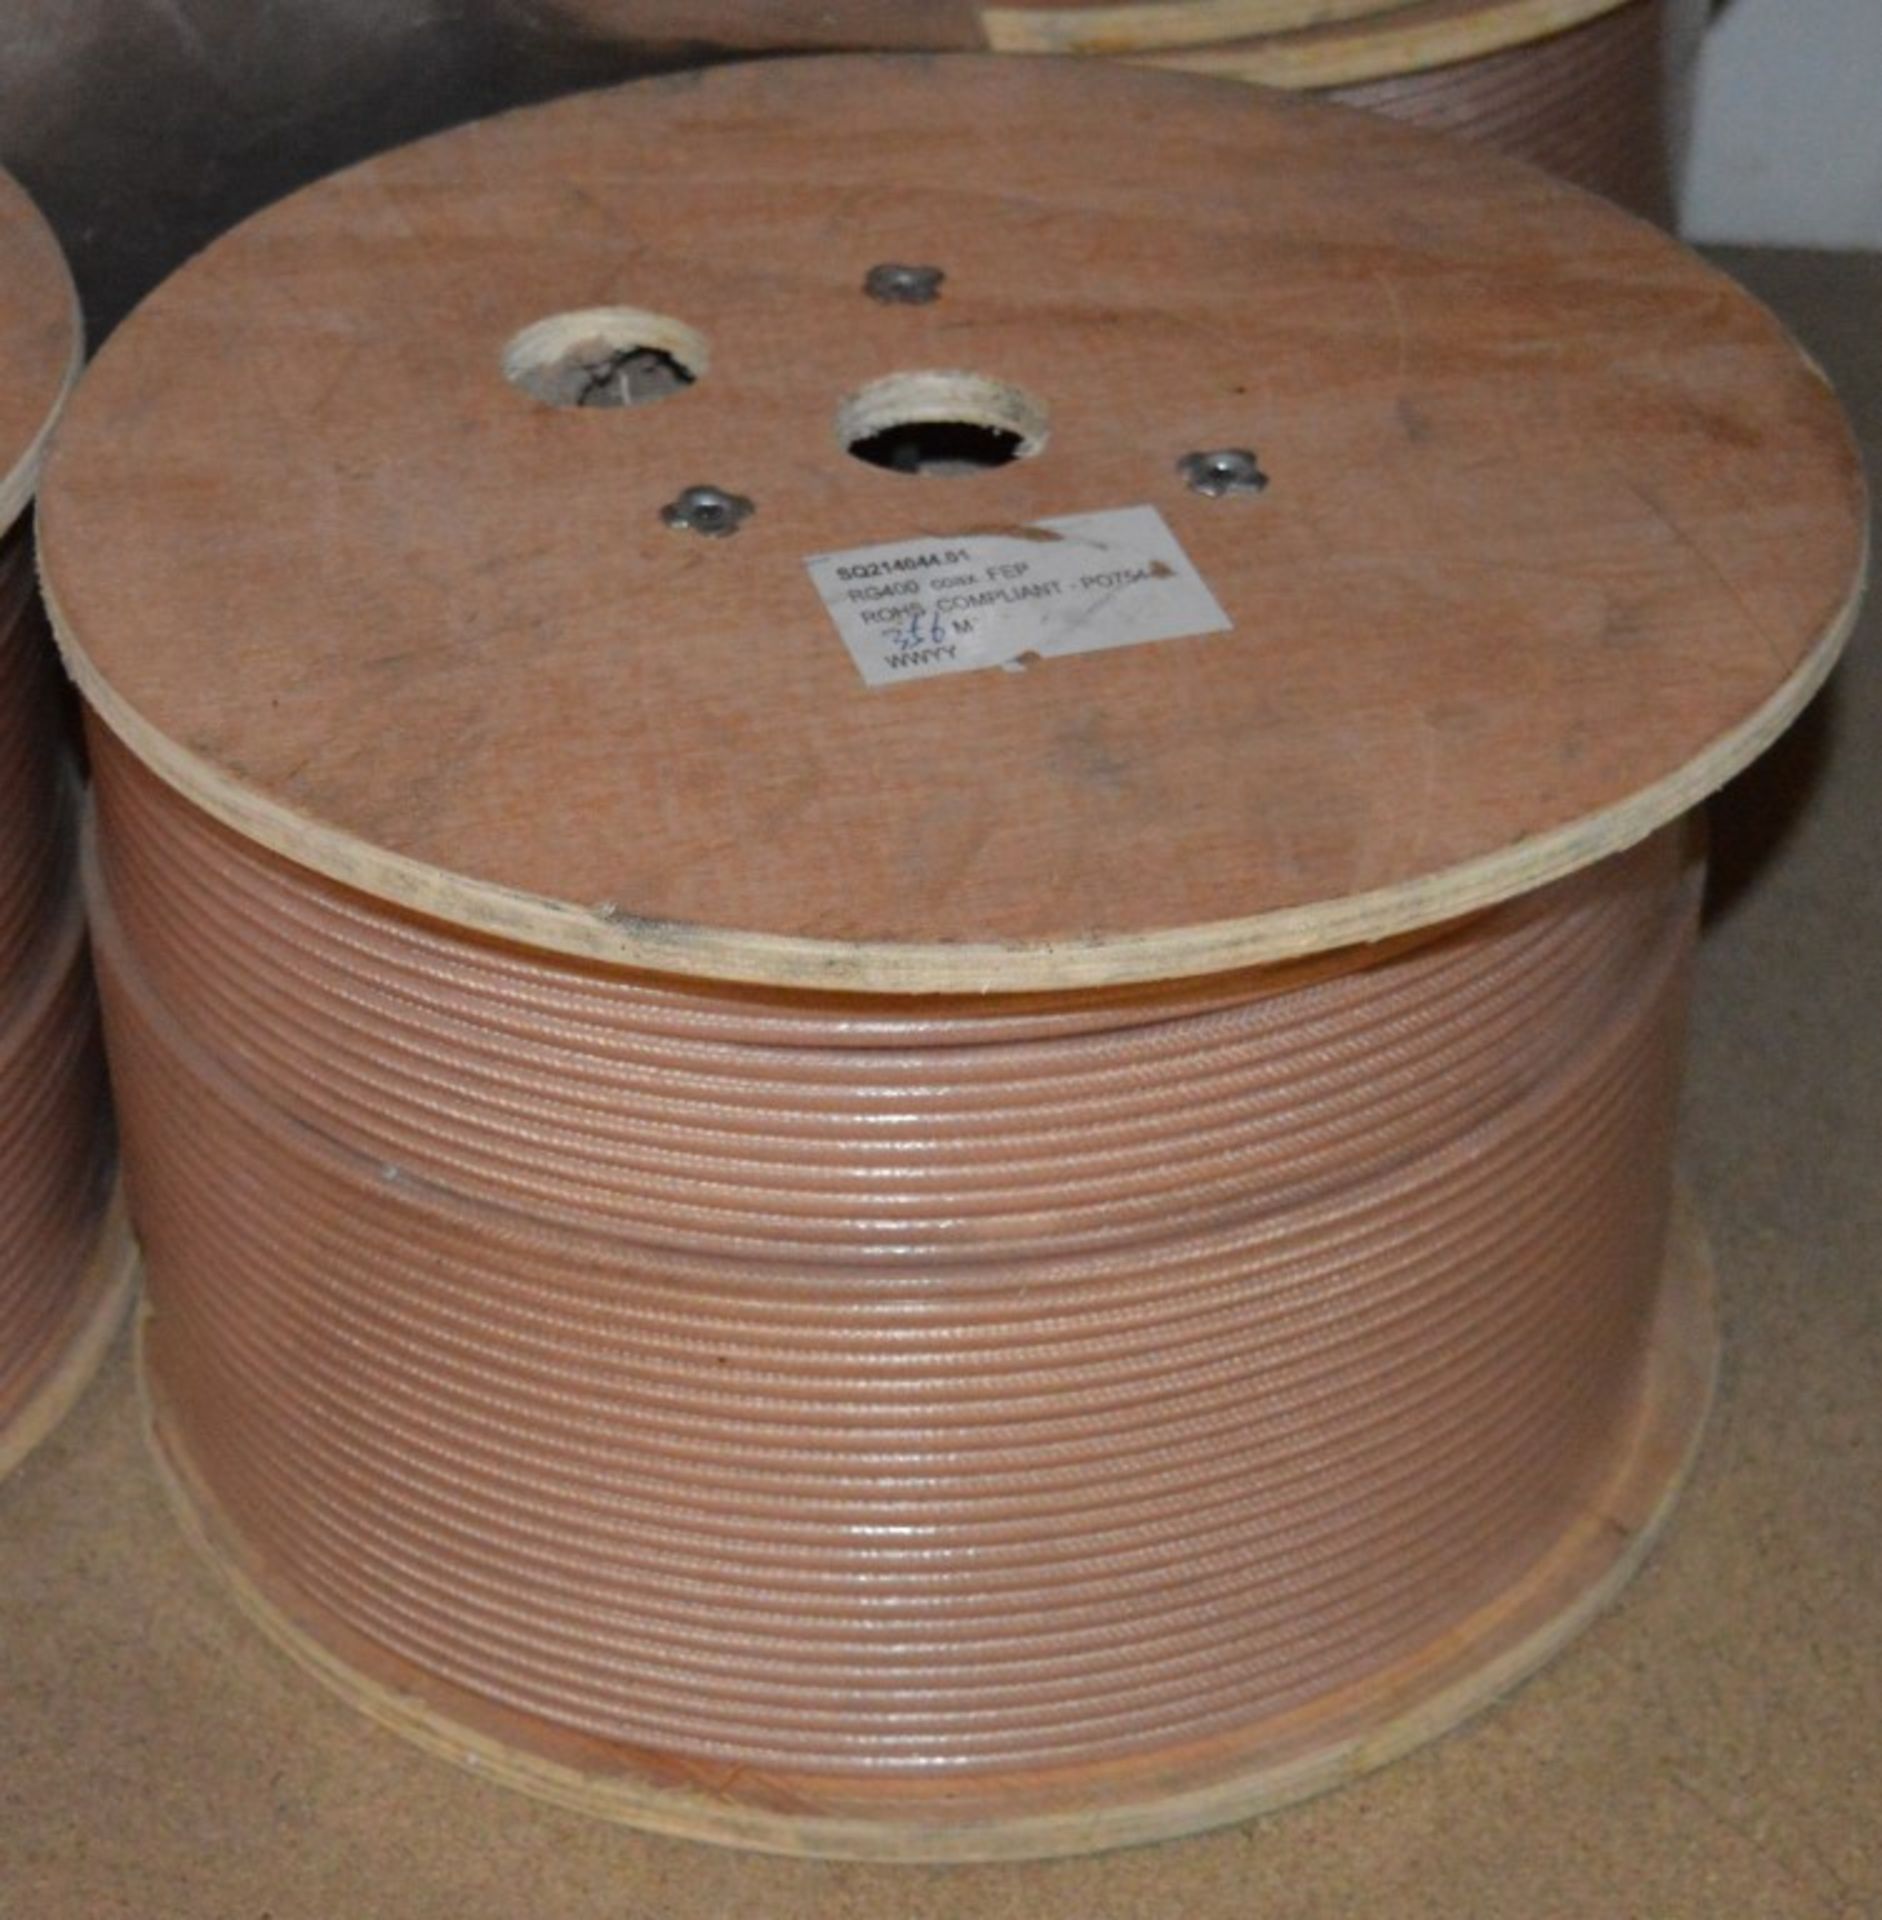 356 x Meter Reel RG400 Coax FEP Cable - Brand New Stock - ROHS Compliant - Brand New Stock - CL300 - - Image 3 of 5